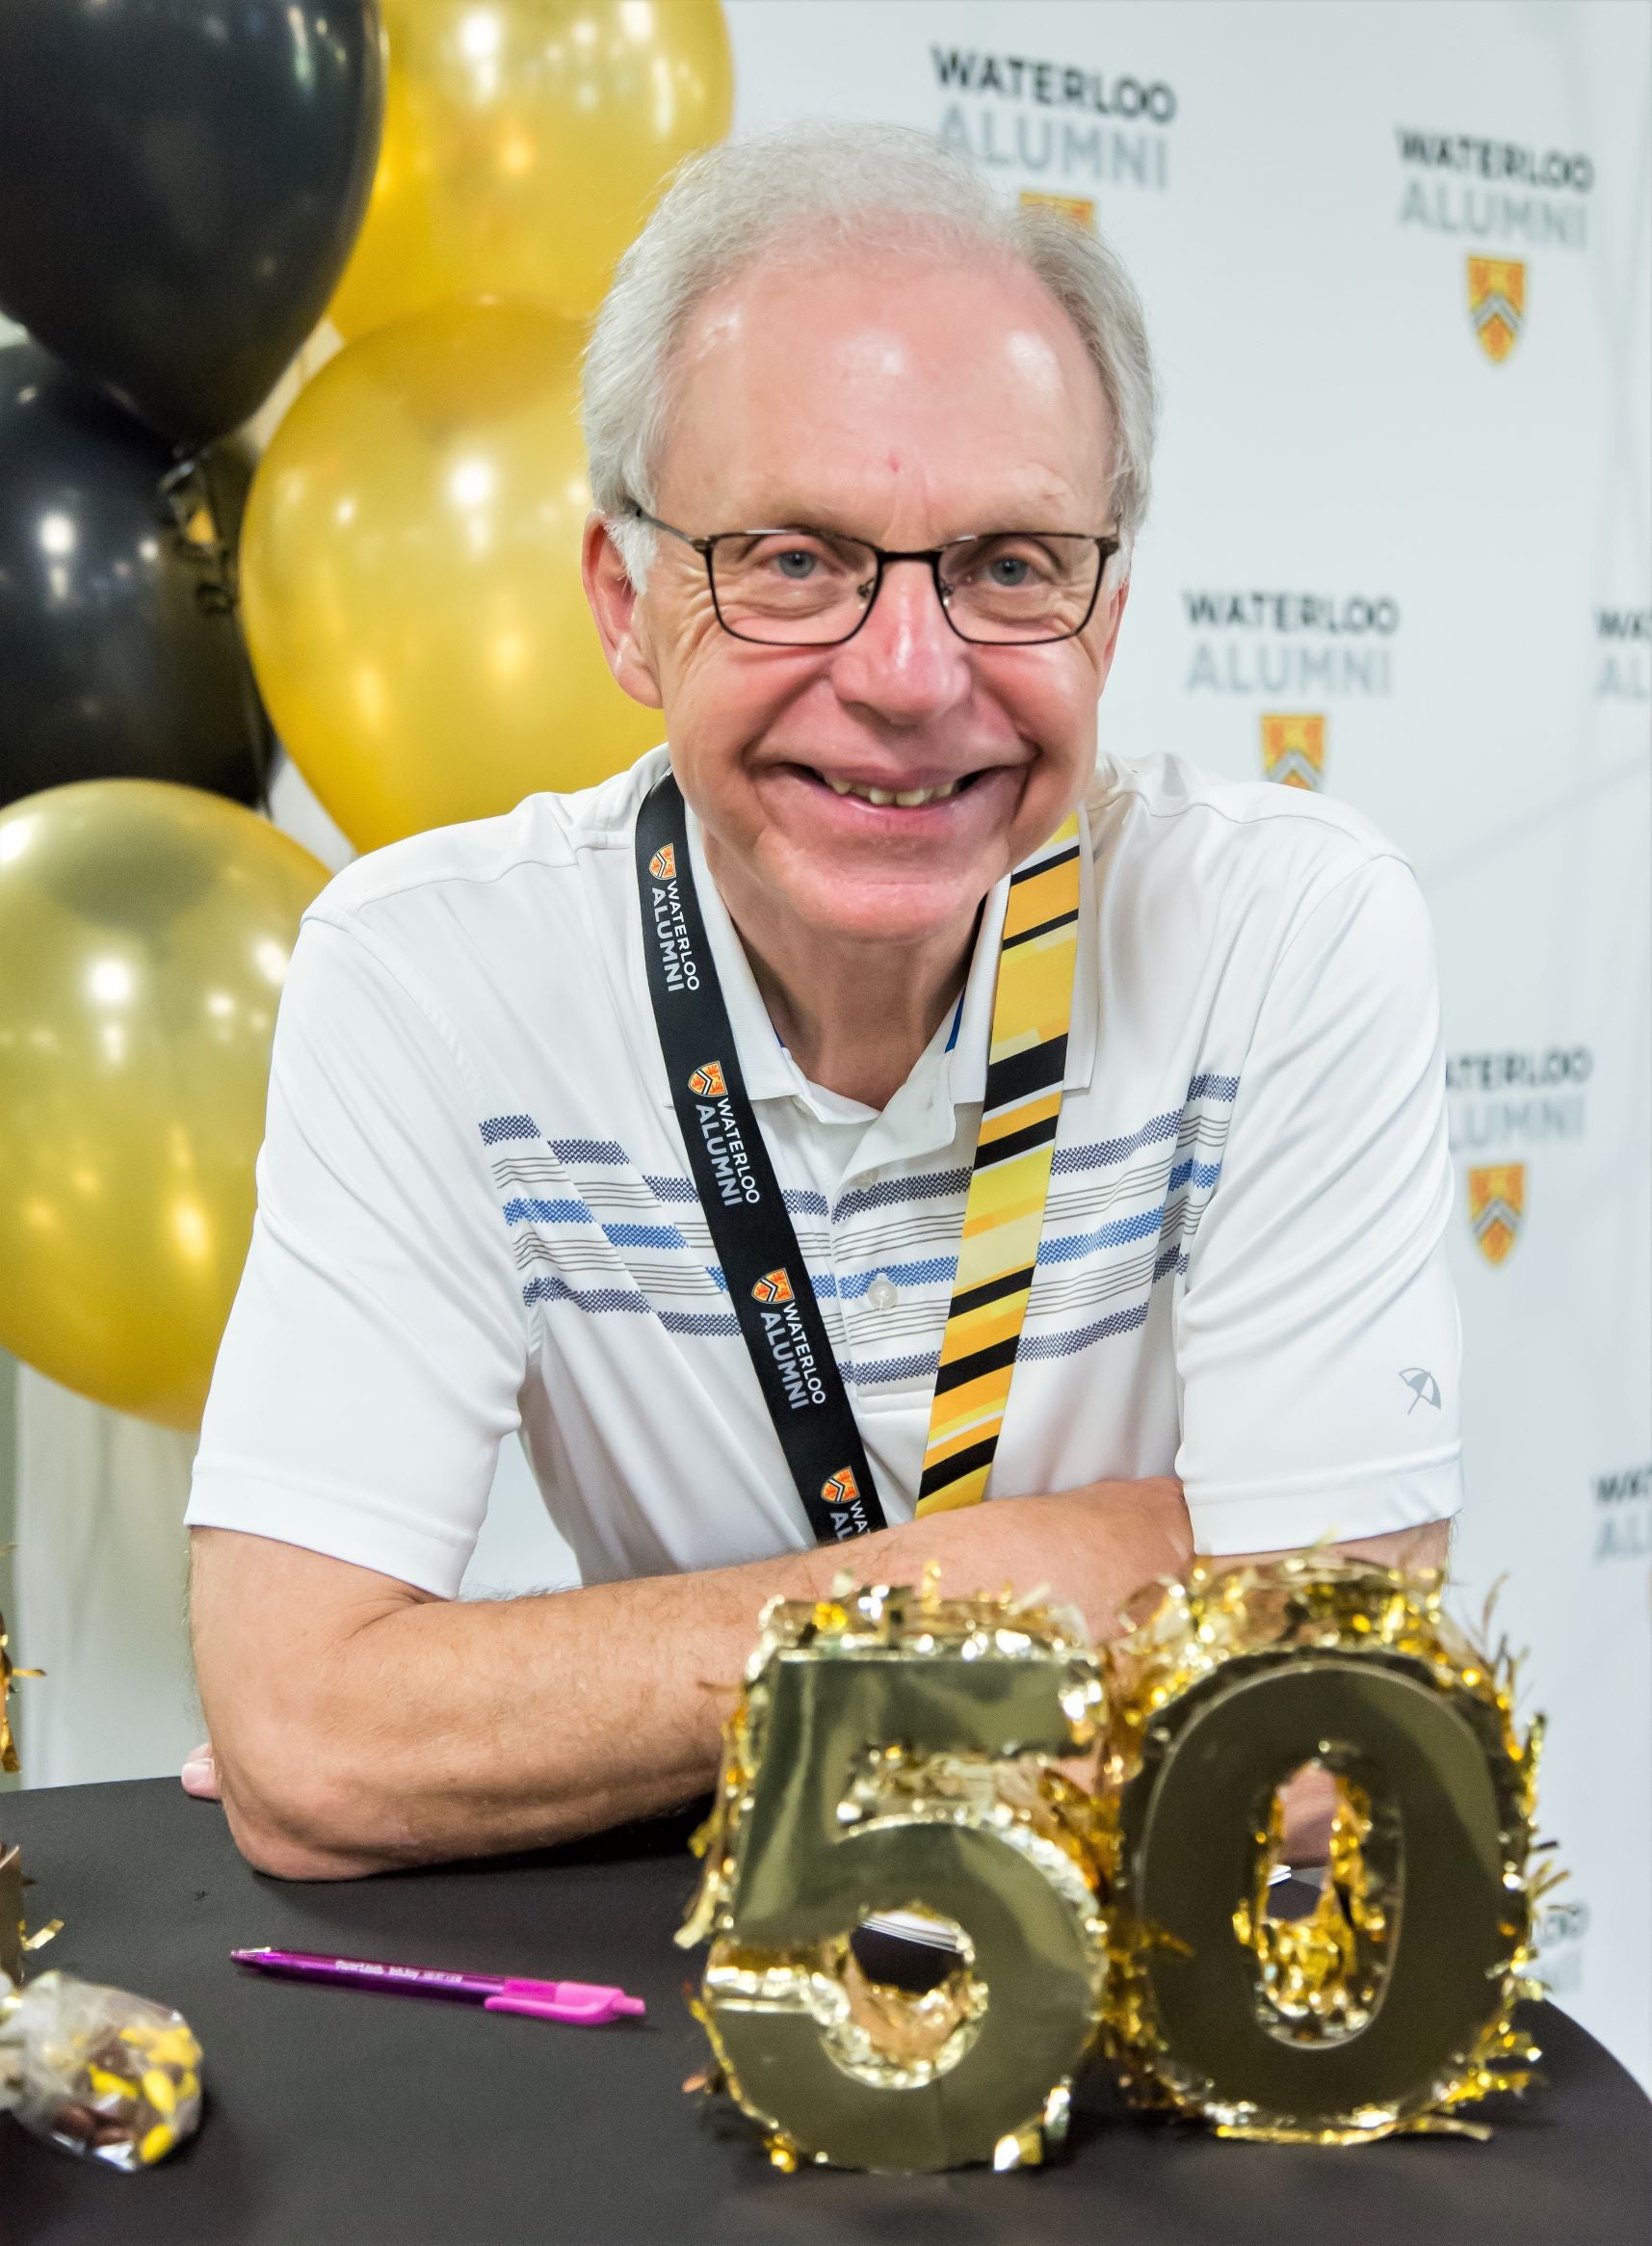 Daryl Smith smiles with gold 50 and ballons